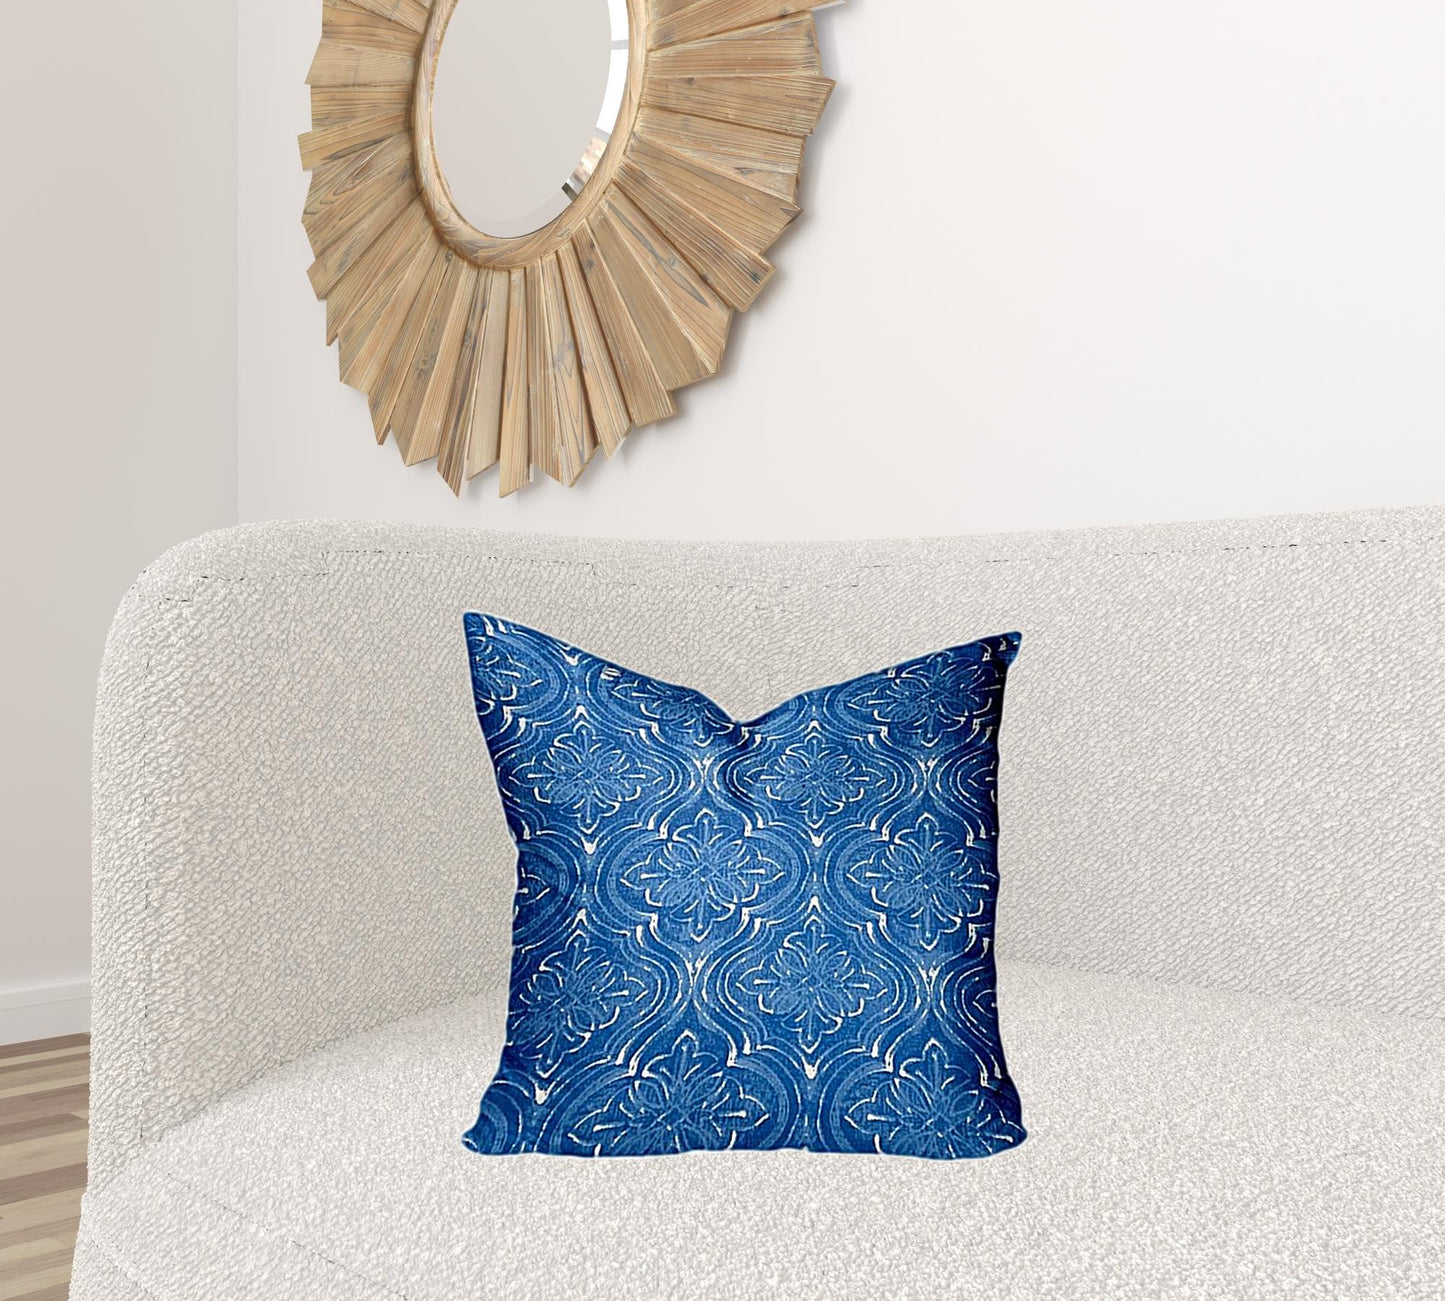 20" X 20" Blue And White Zippered Ikat Throw Indoor Outdoor Pillow